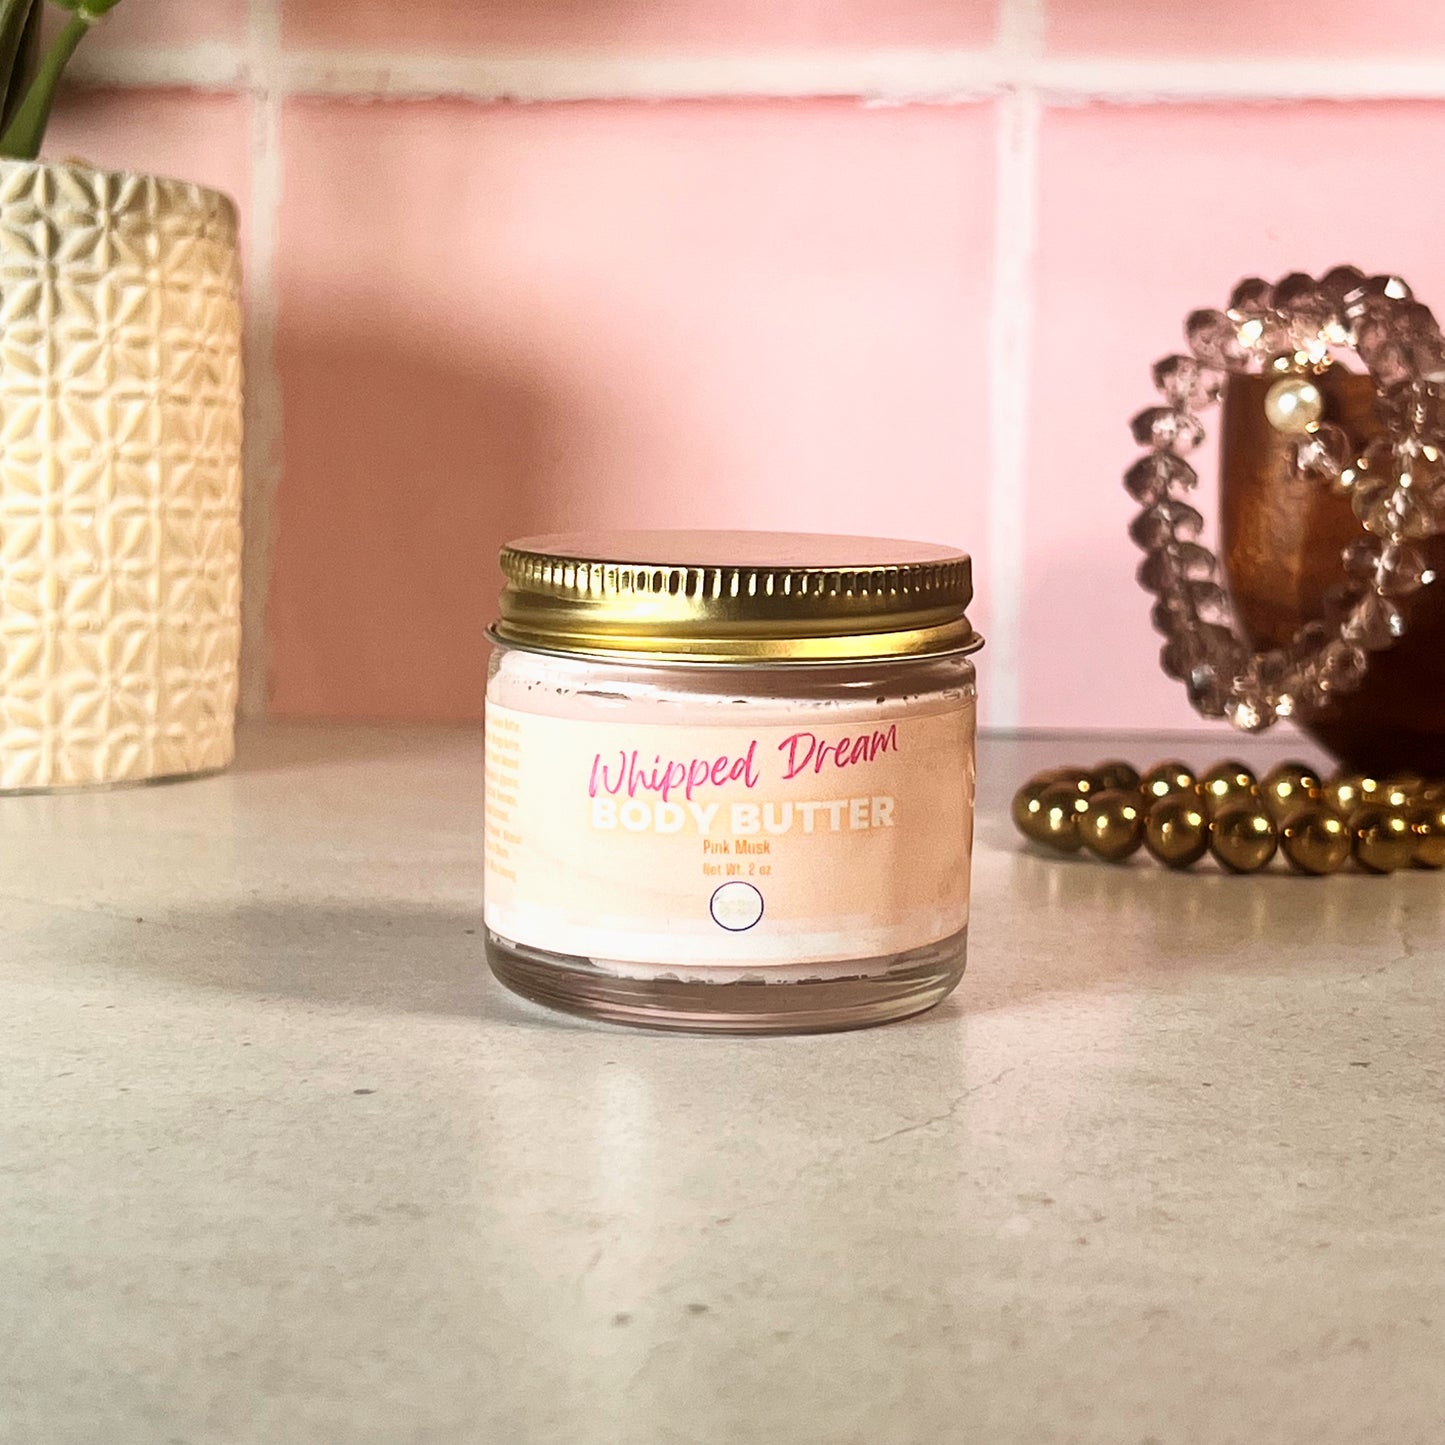 Whipped Dream Whipped Body Butter "Pink Musk"